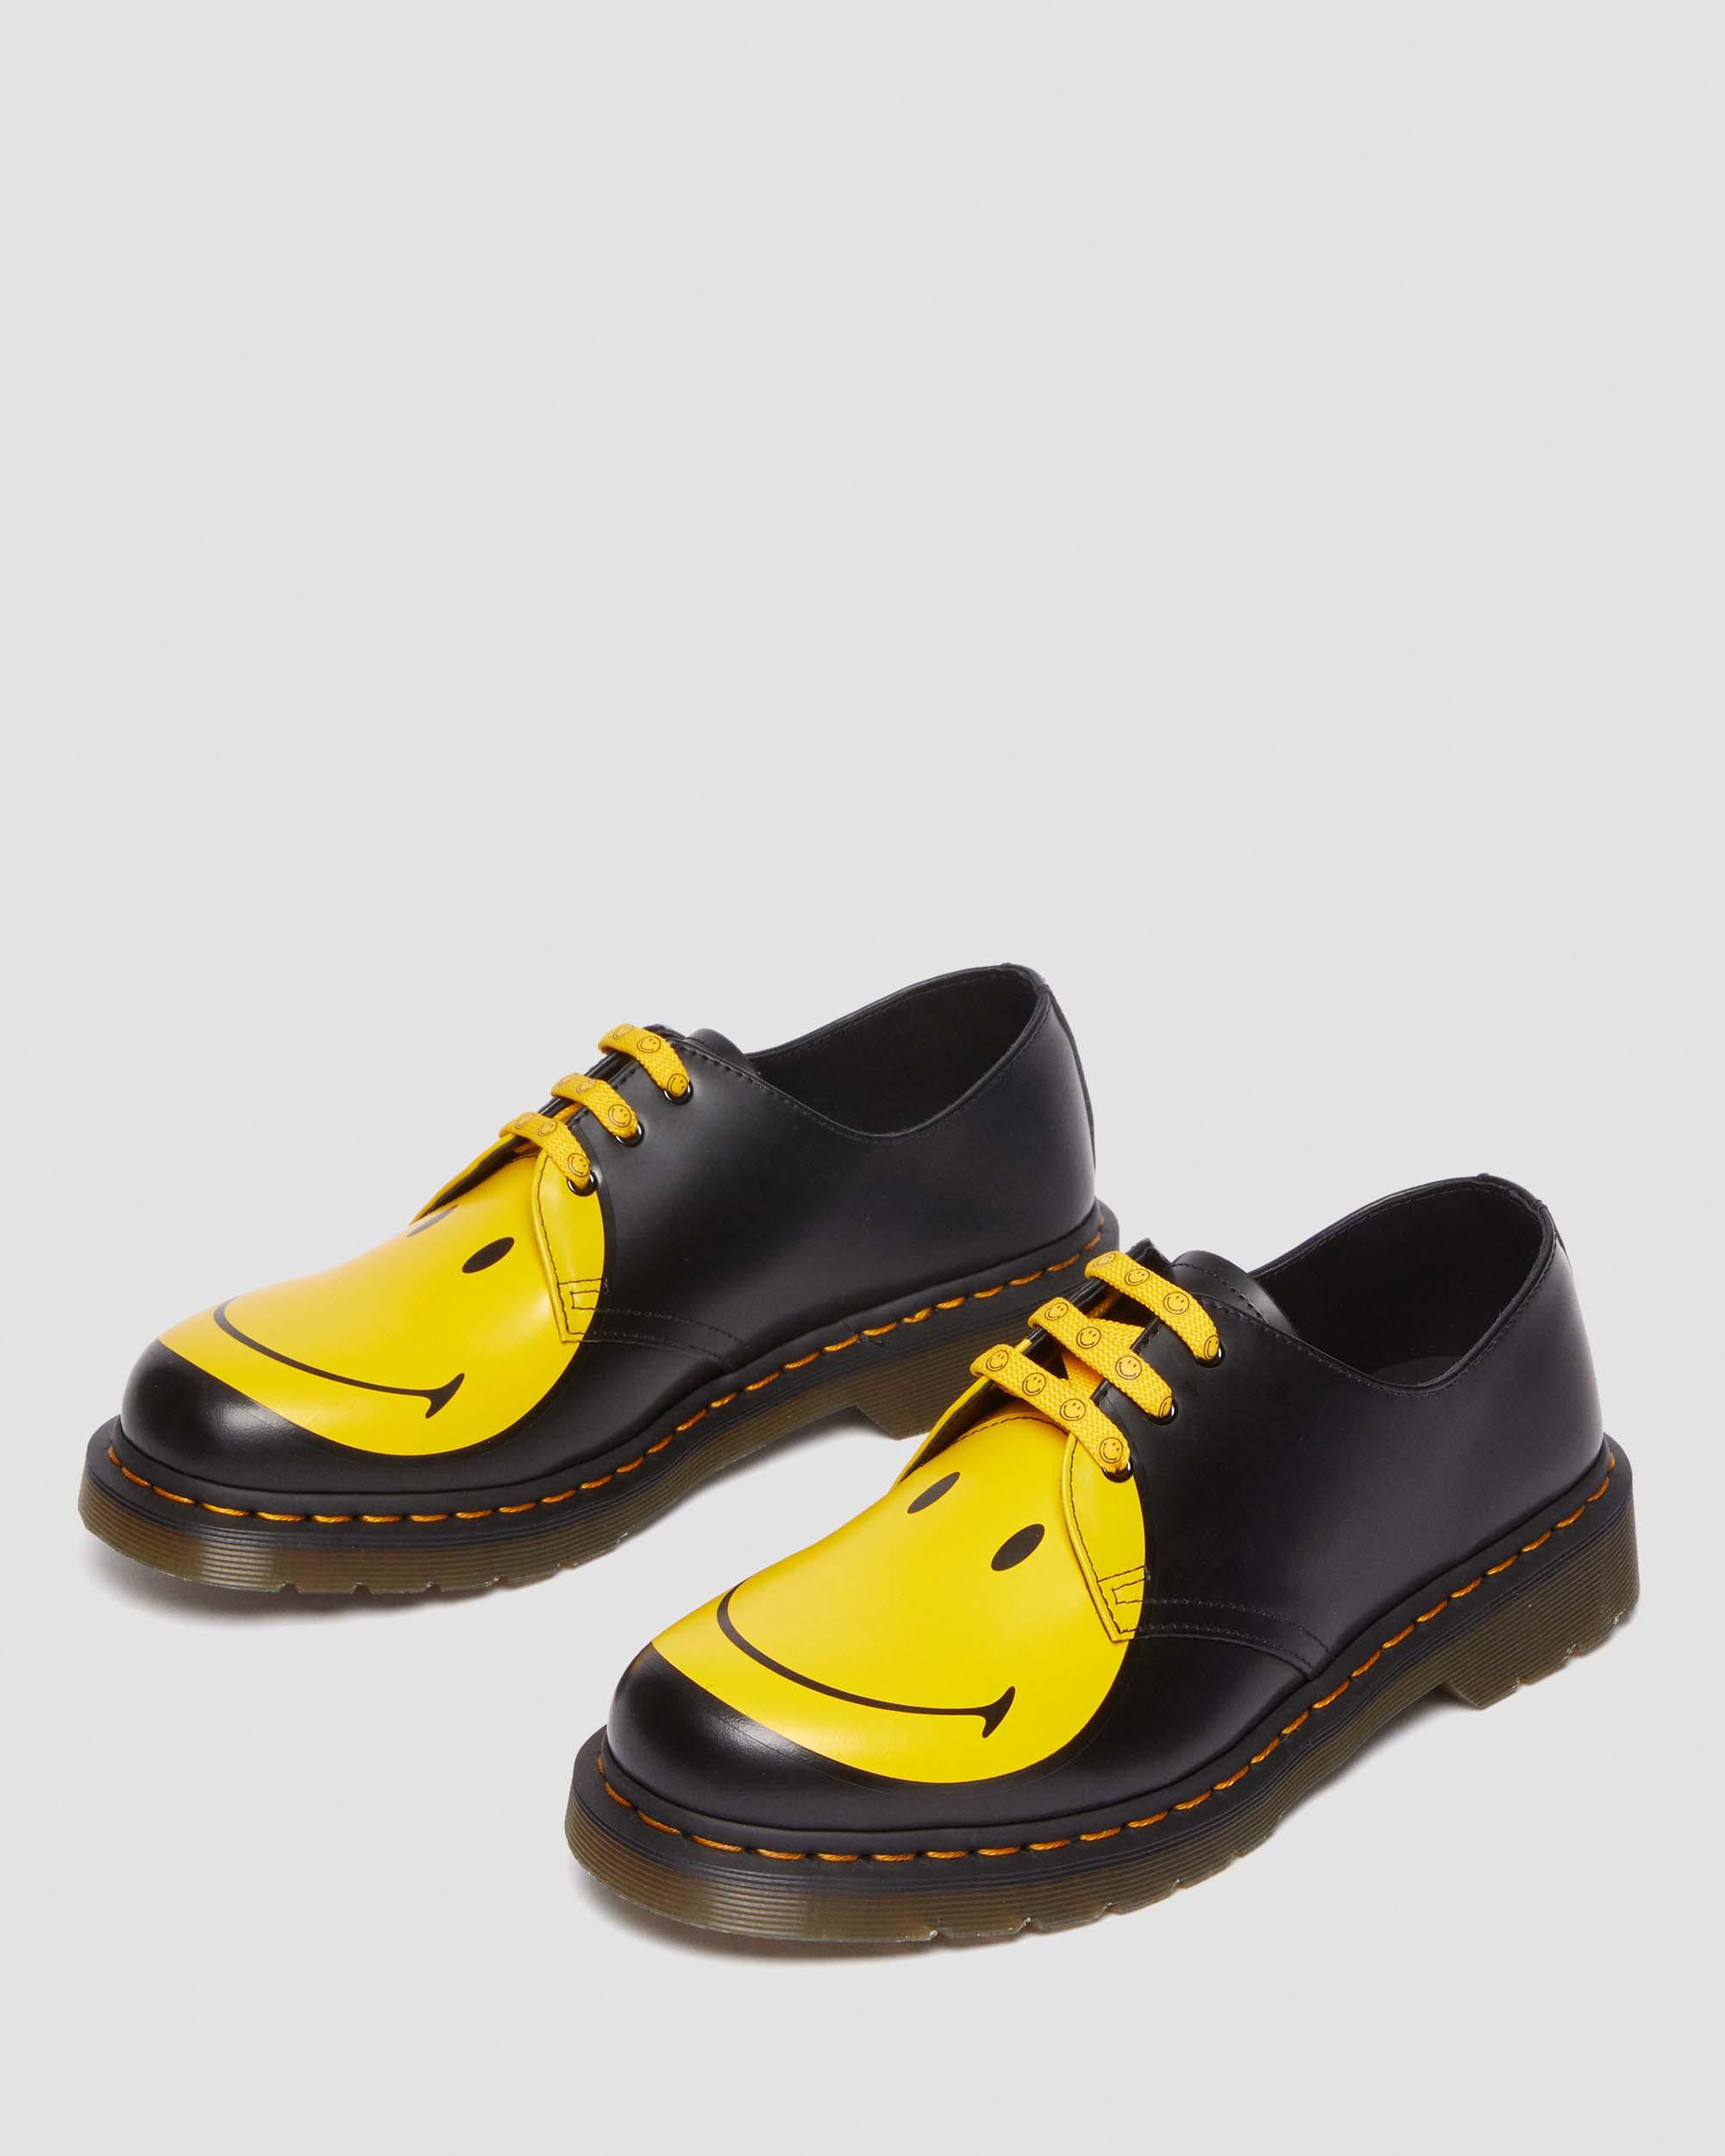 1461 Smiley® Smooth Leather Oxford Shoes in Black | Dr. Martens